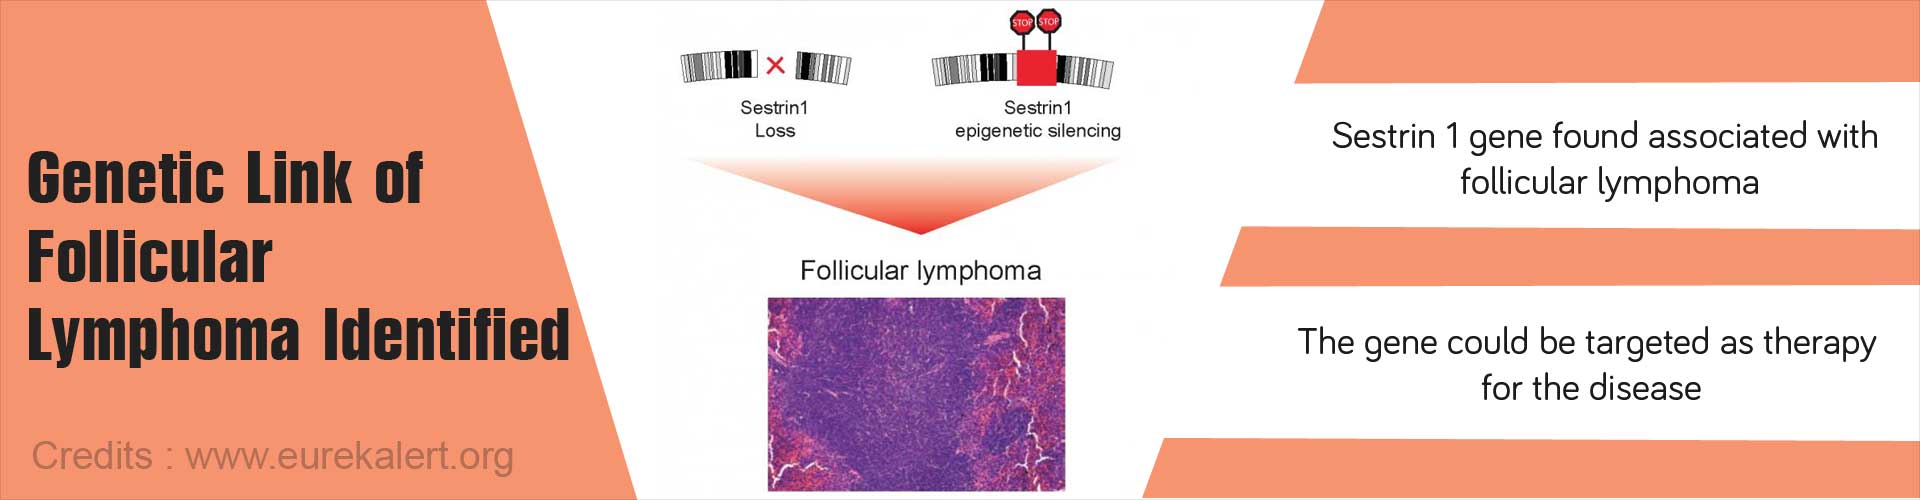 Genetic link of follicular lymphoma identified
- sestrin1 gene found associated with follicular lymphoma
- the gene could be targeted as therapy for the disease